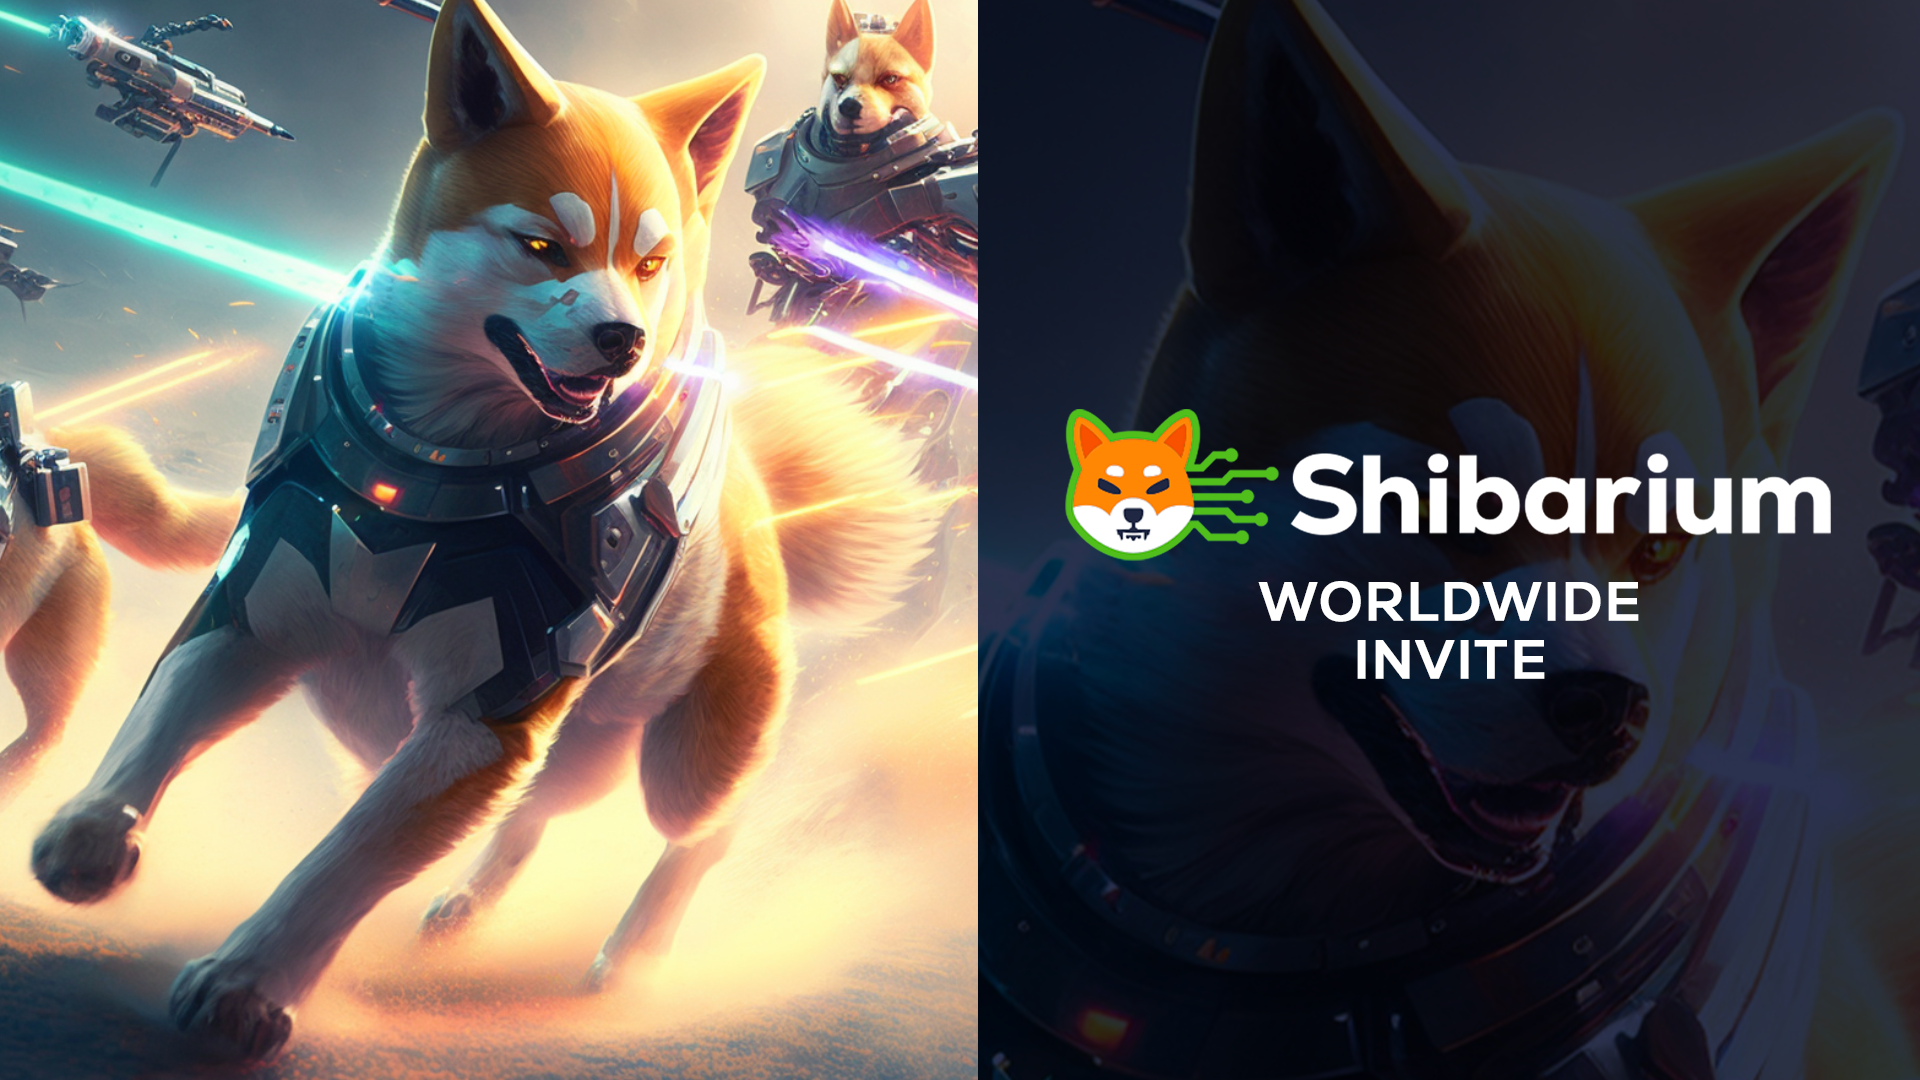 https://nftgames.net/wp-content/uploads/2023/02/Shiba-Inus-pseudonymous-developer-hints-at-the-release-of-Shibarium-beta.png